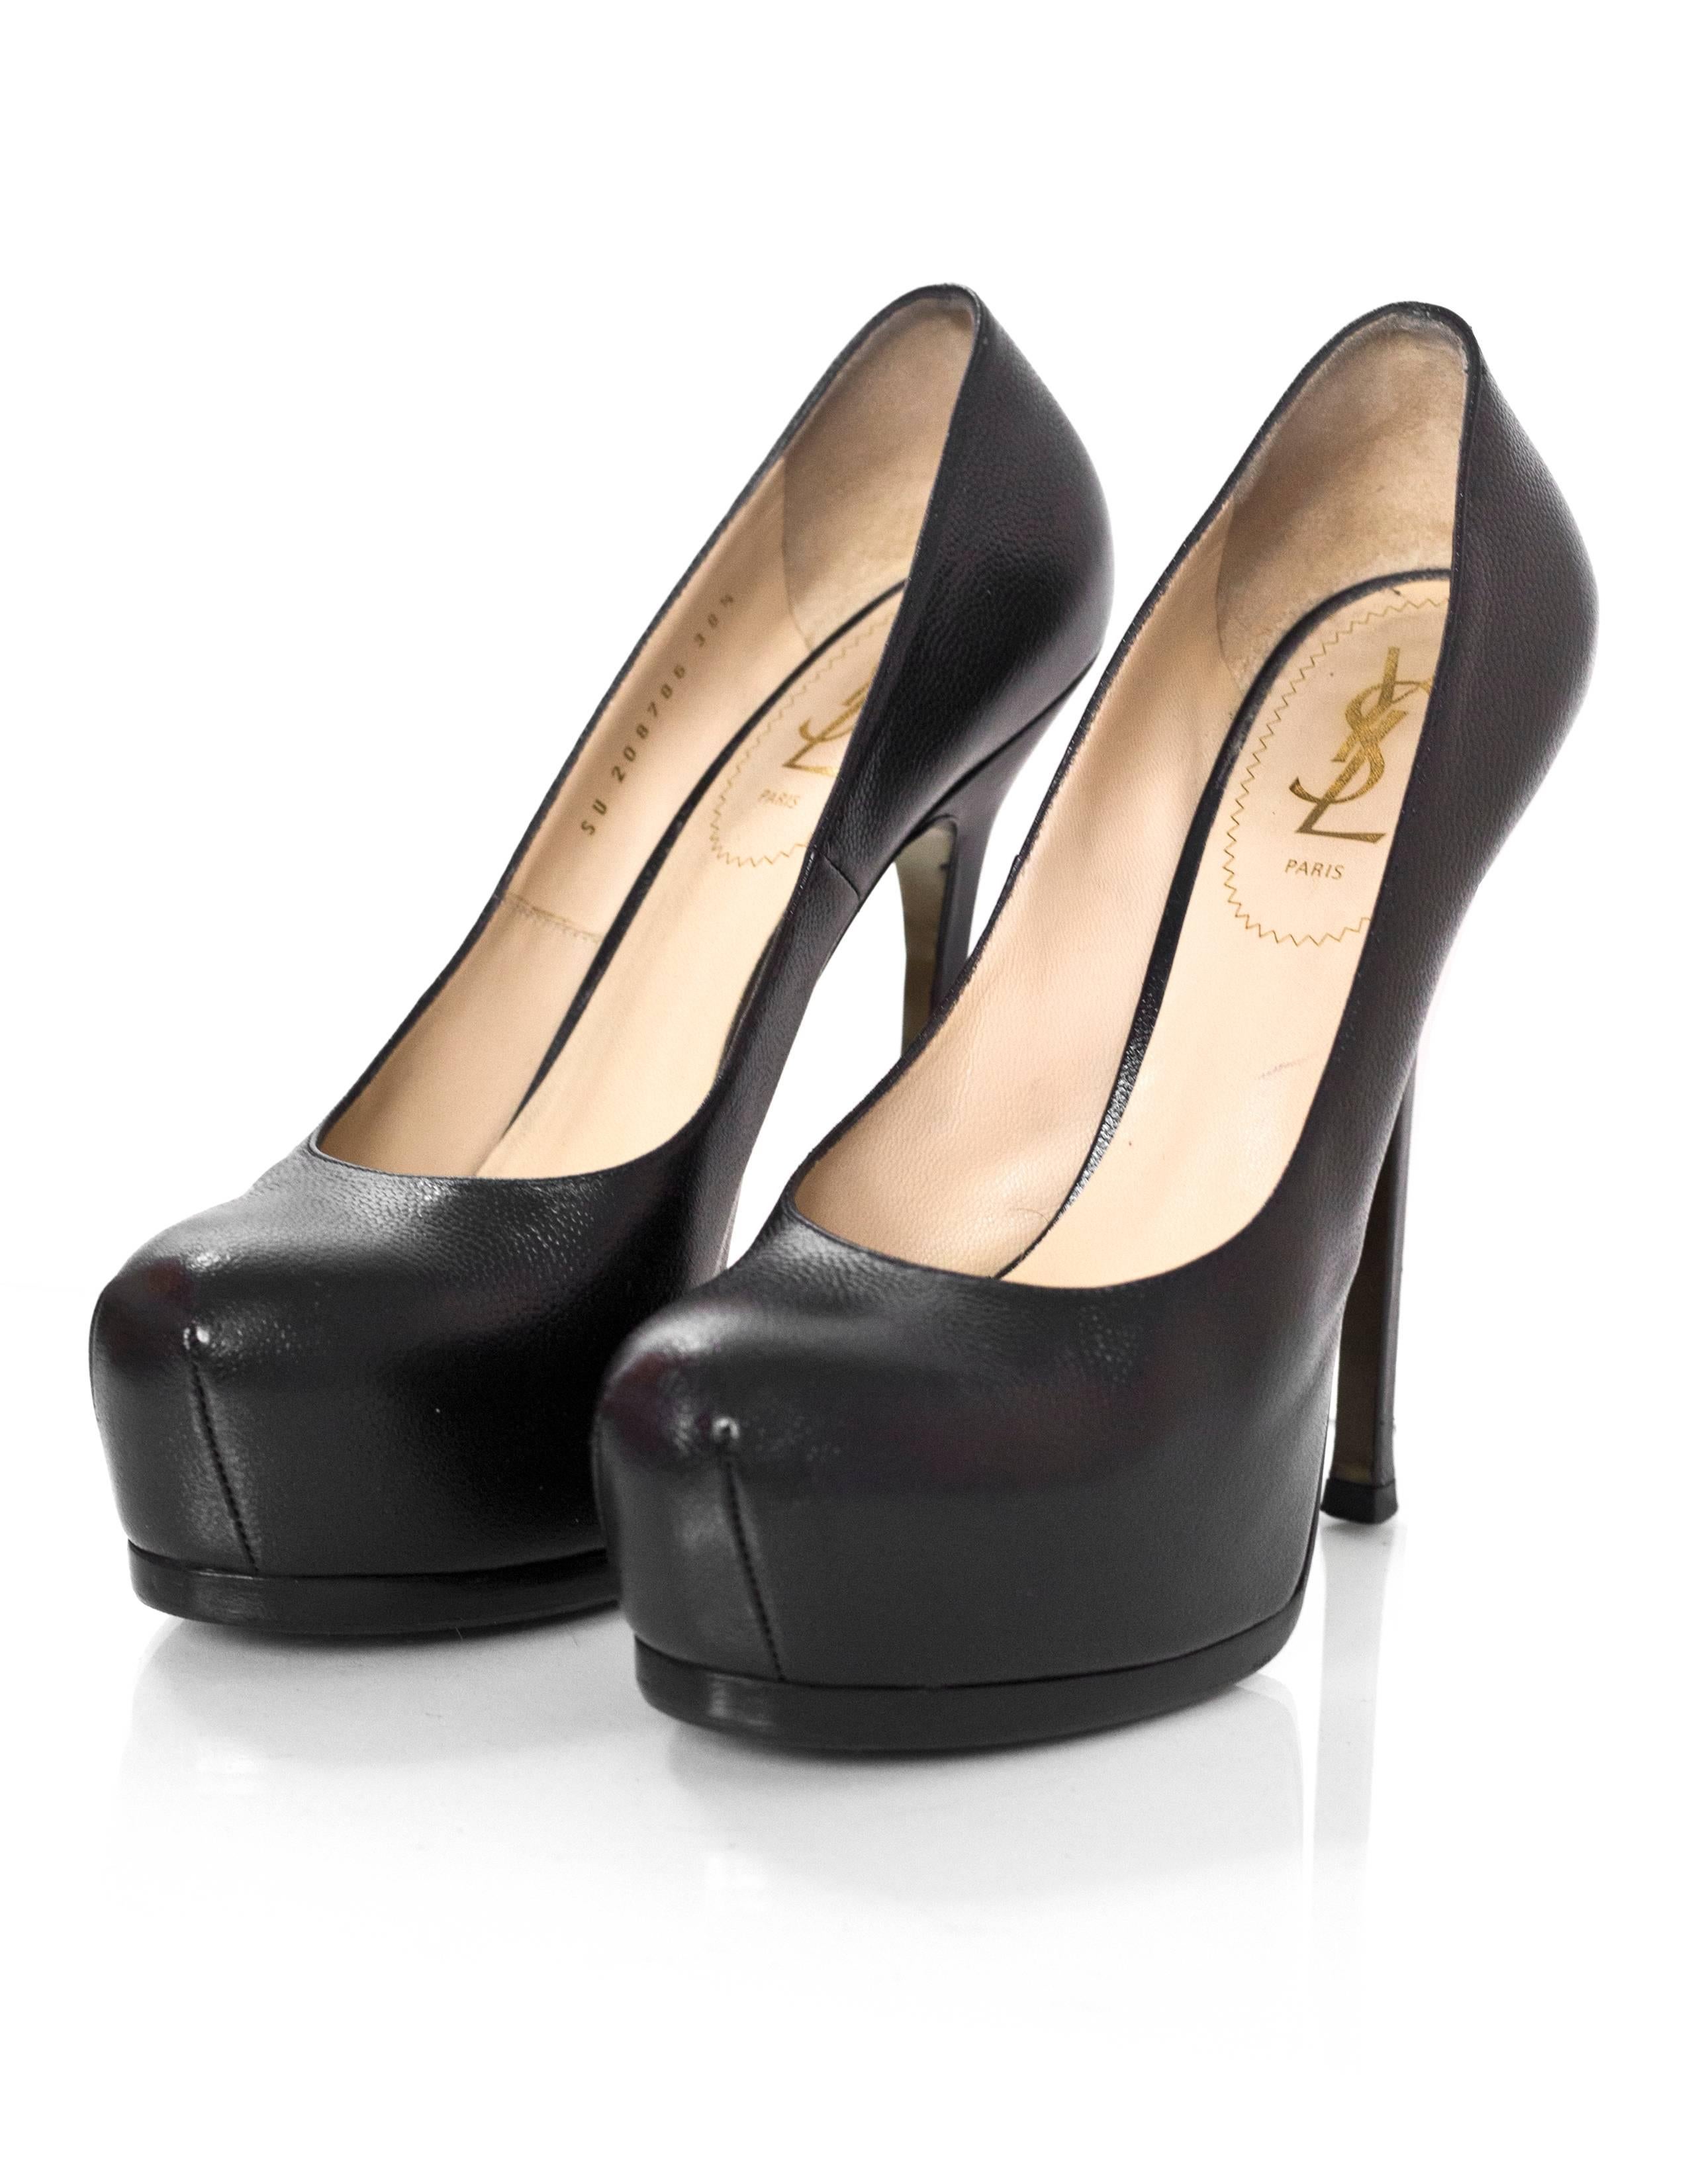 YSL Black Tribtoo Pumps Sz 38.5

Made In: Italy
Color: Black
Materials: Leather
Closure/Opening: Slip on
Sole Stamp: Yves Saint Laurent Made in Italy 38.5
Retail Price: $795 + tax
Overall Condition: Excellent pre-owned condition with the exception